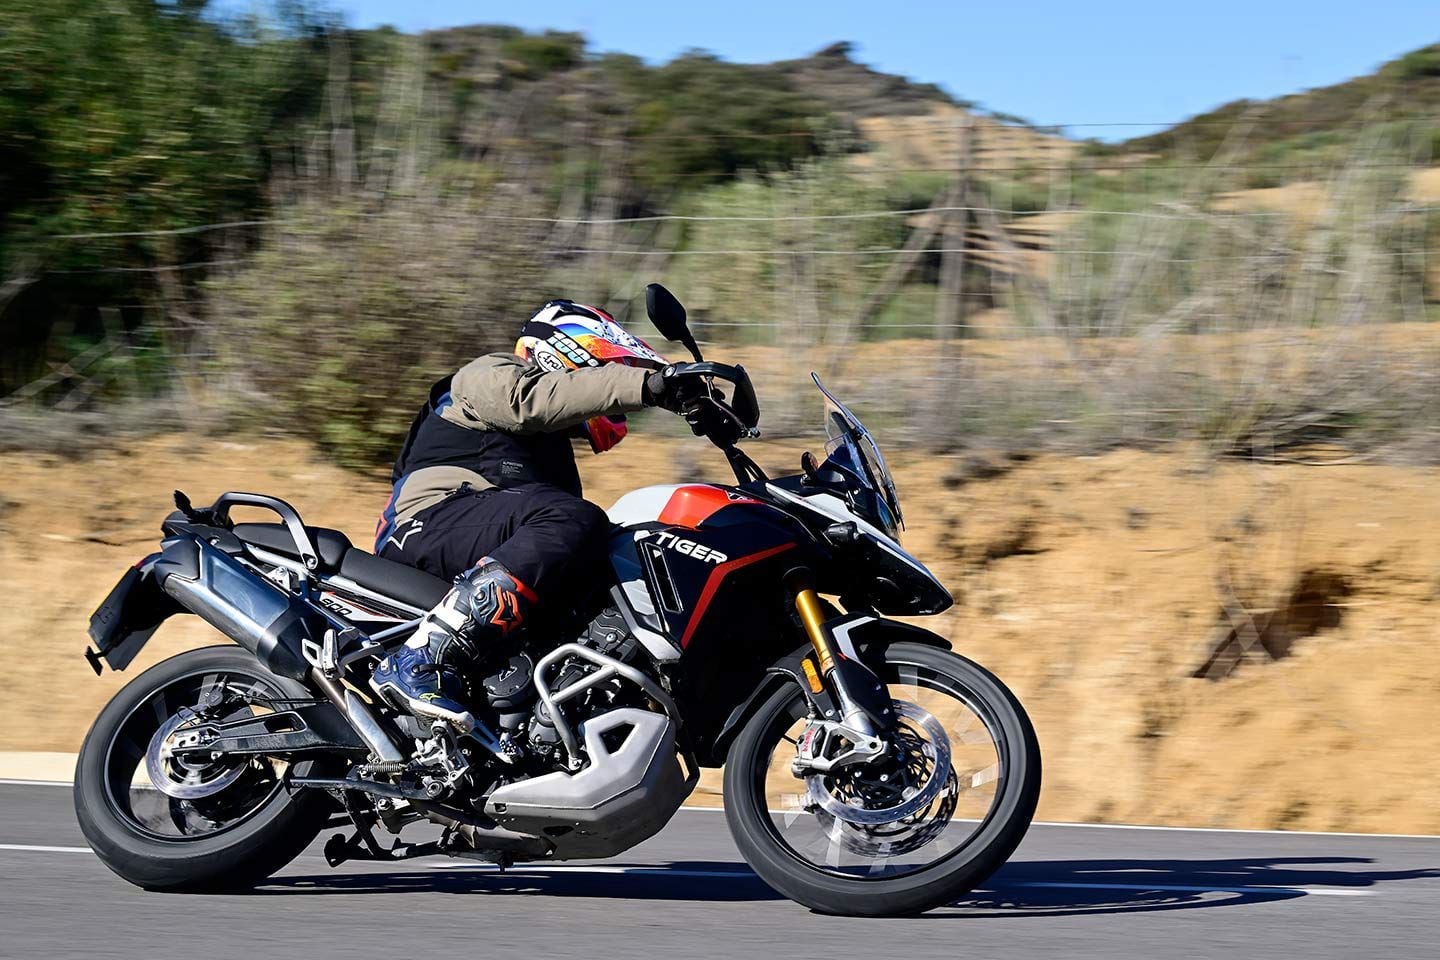 Despite longer suspension travel and a 21-inch front tire, the Tiger 900 Rally Pro is excellent on the street.